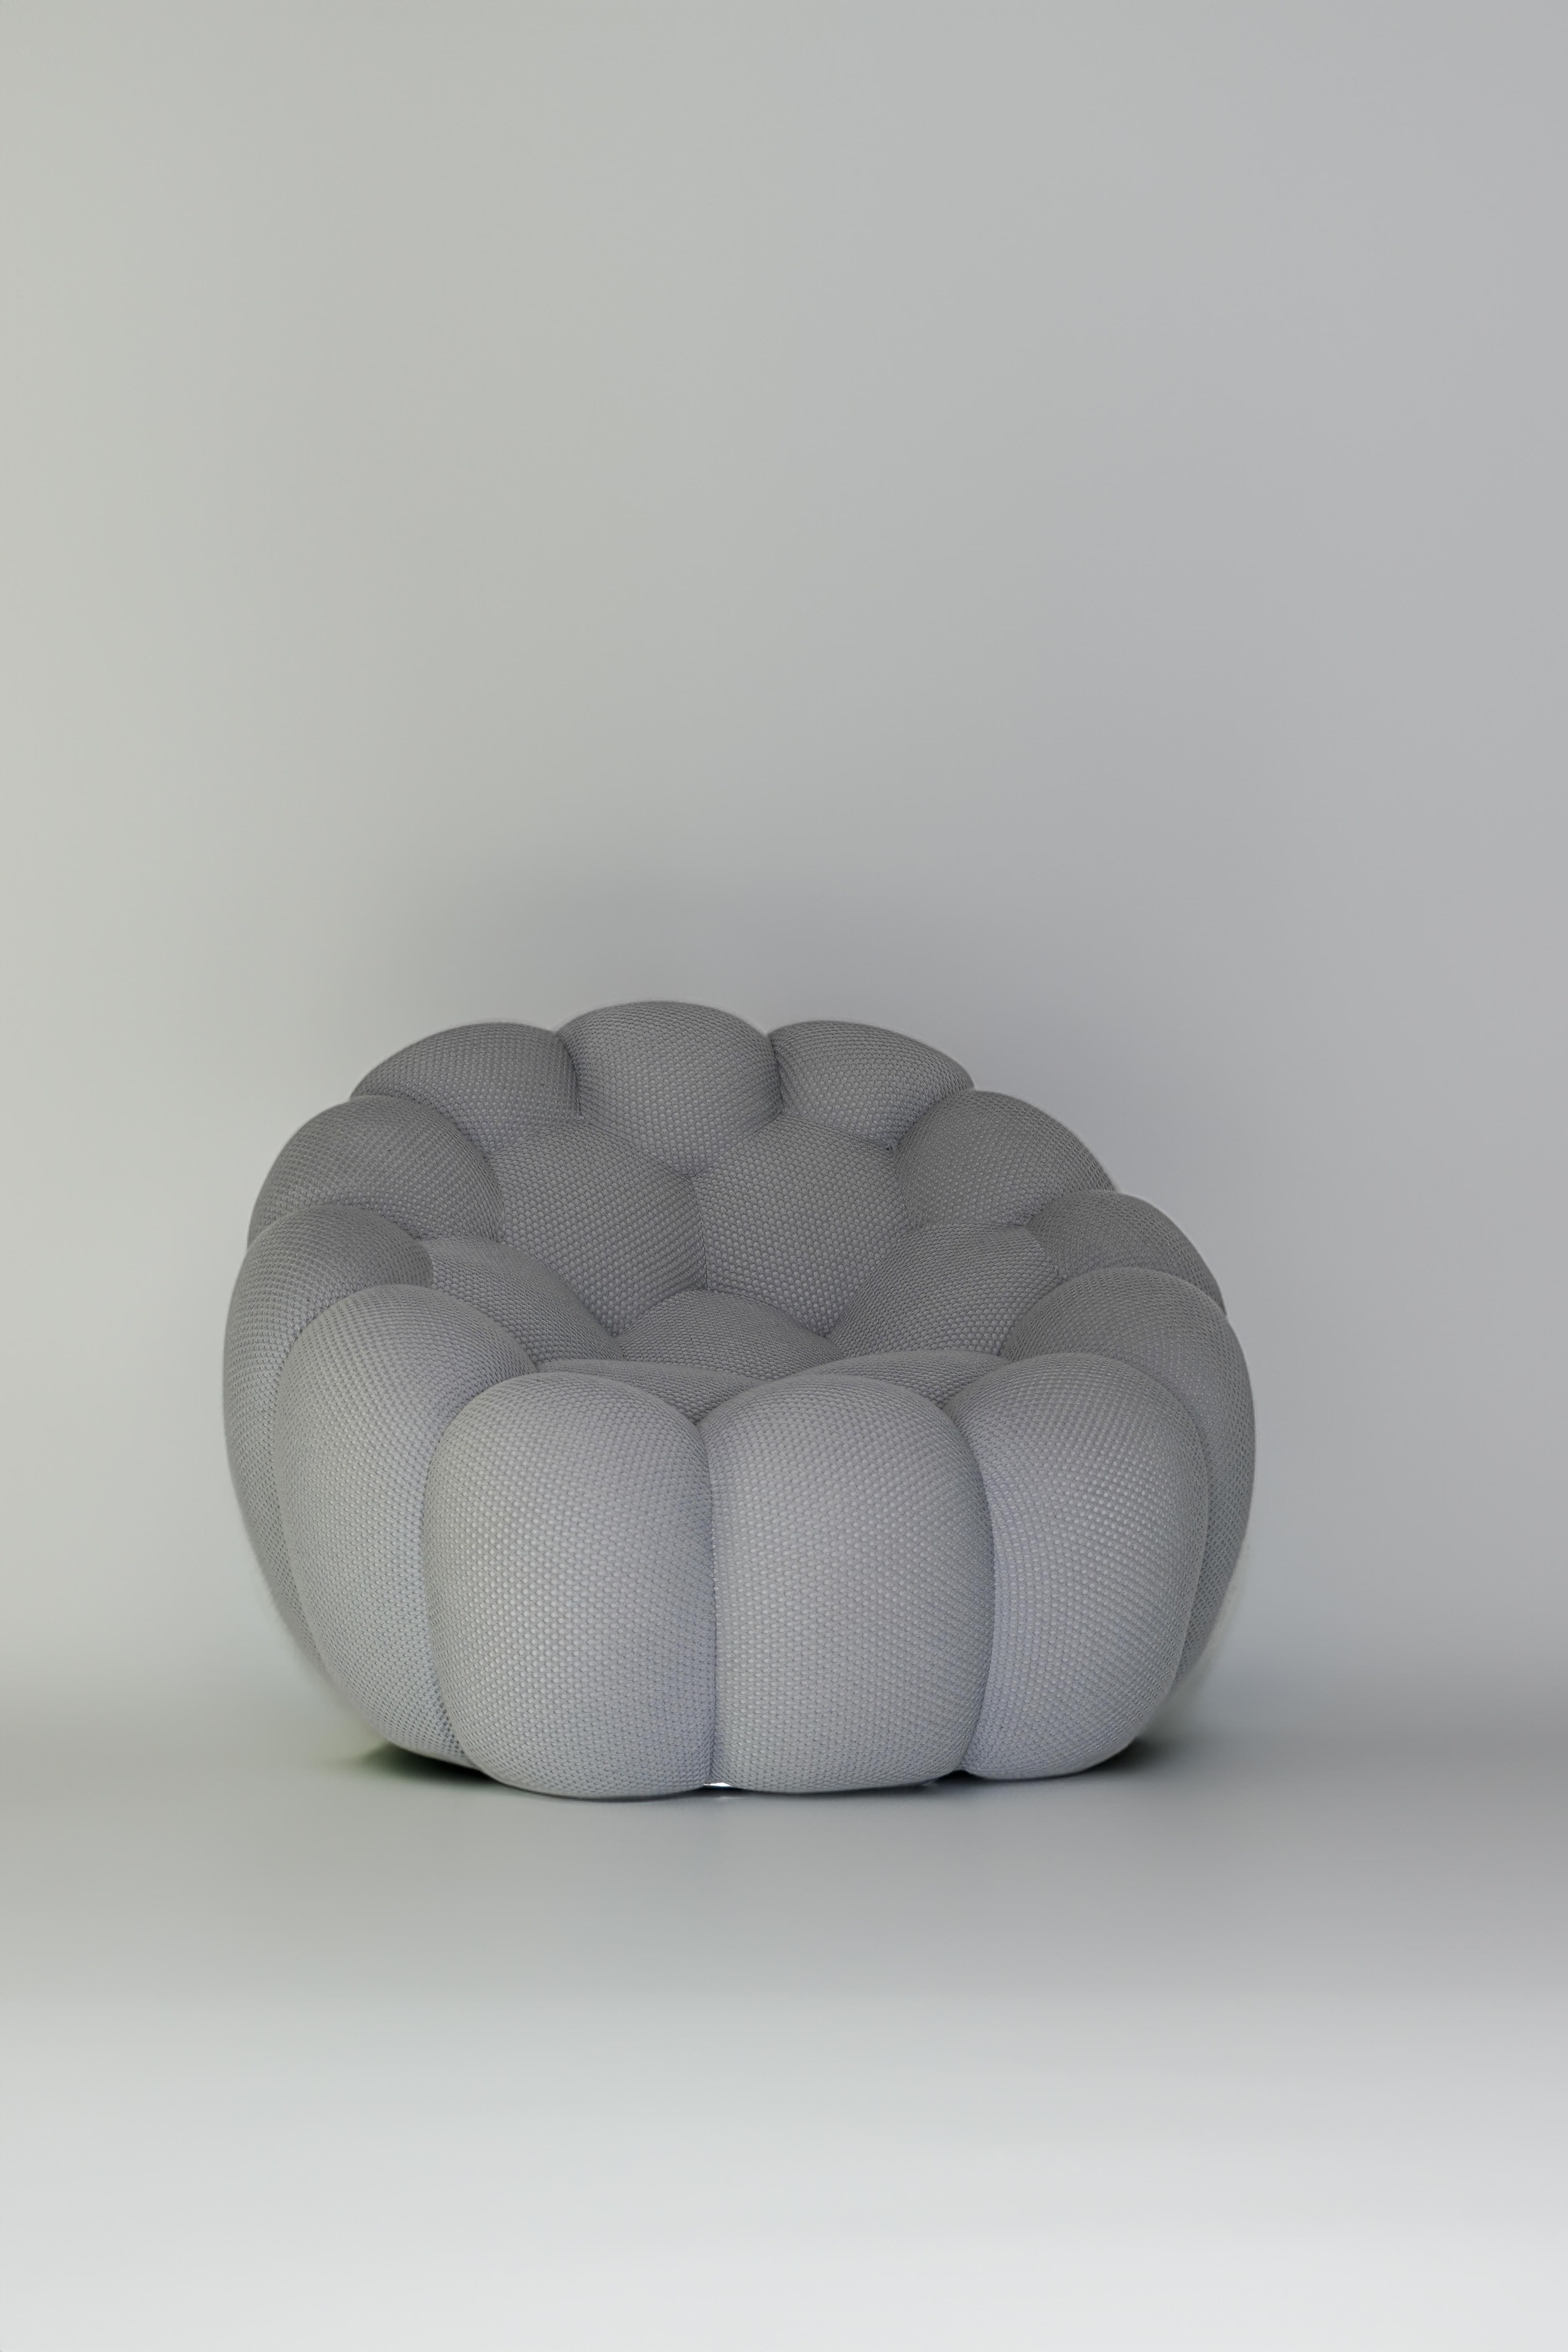 Bubble Pivoting Armchair designed by Sacha Lakic for Roche Bobois, 2016. Standing at the intersection of innovation and passion is the bubble, made by hand in Italy, it required the development of a novel fabric with elasticity stretching in all